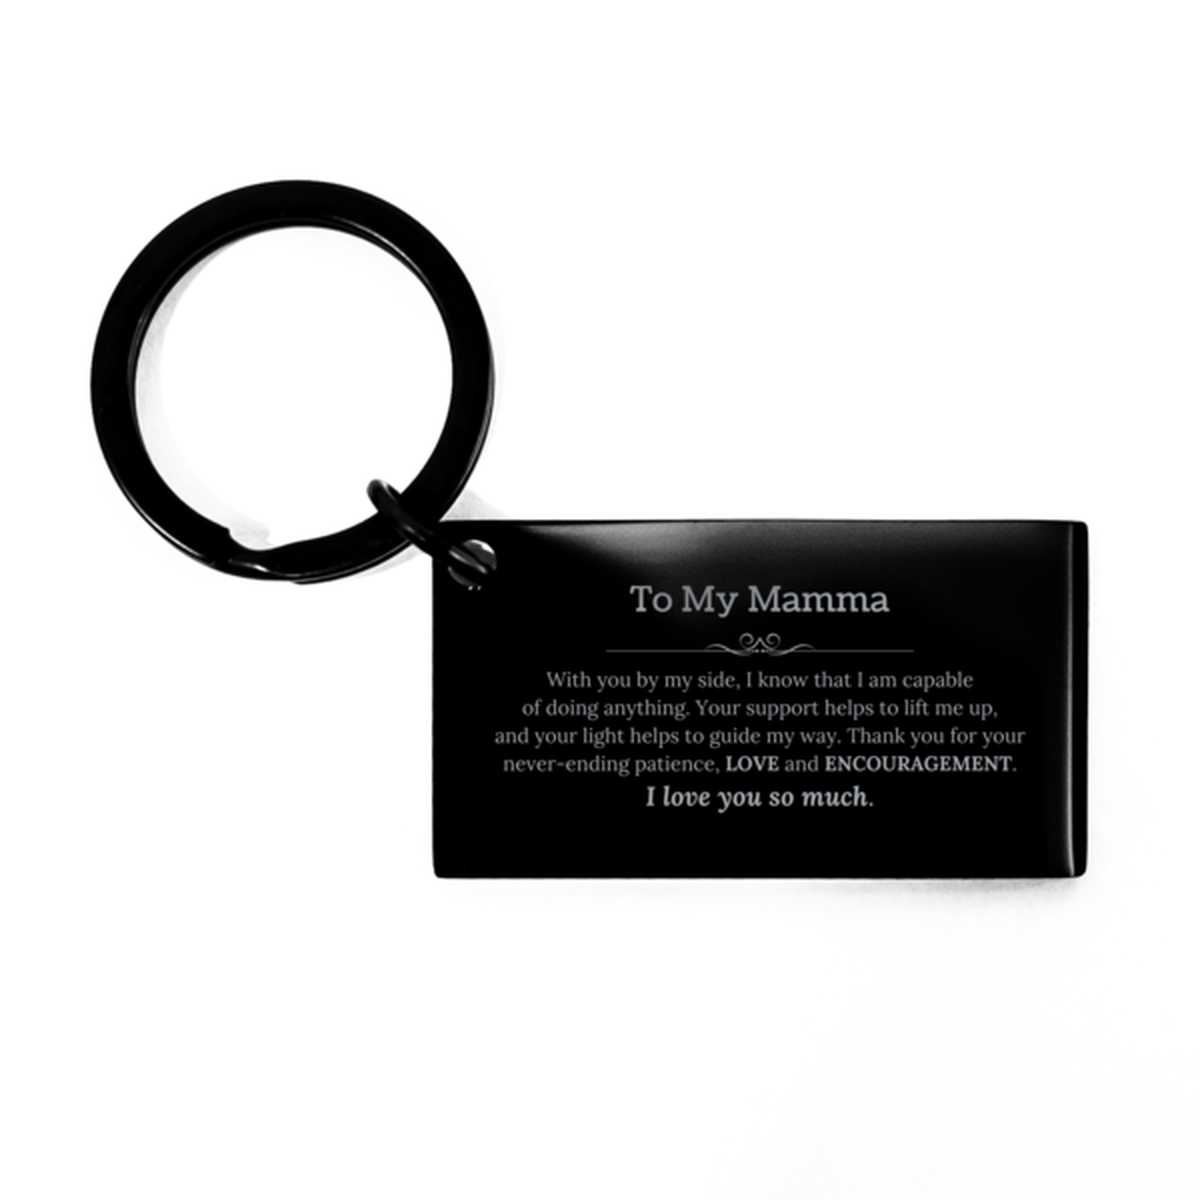 Appreciation Mamma Keychain Gifts, To My Mamma Birthday Christmas Wedding Keepsake Gifts for Mamma With you by my side, I know that I am capable of doing anything. I love you so much